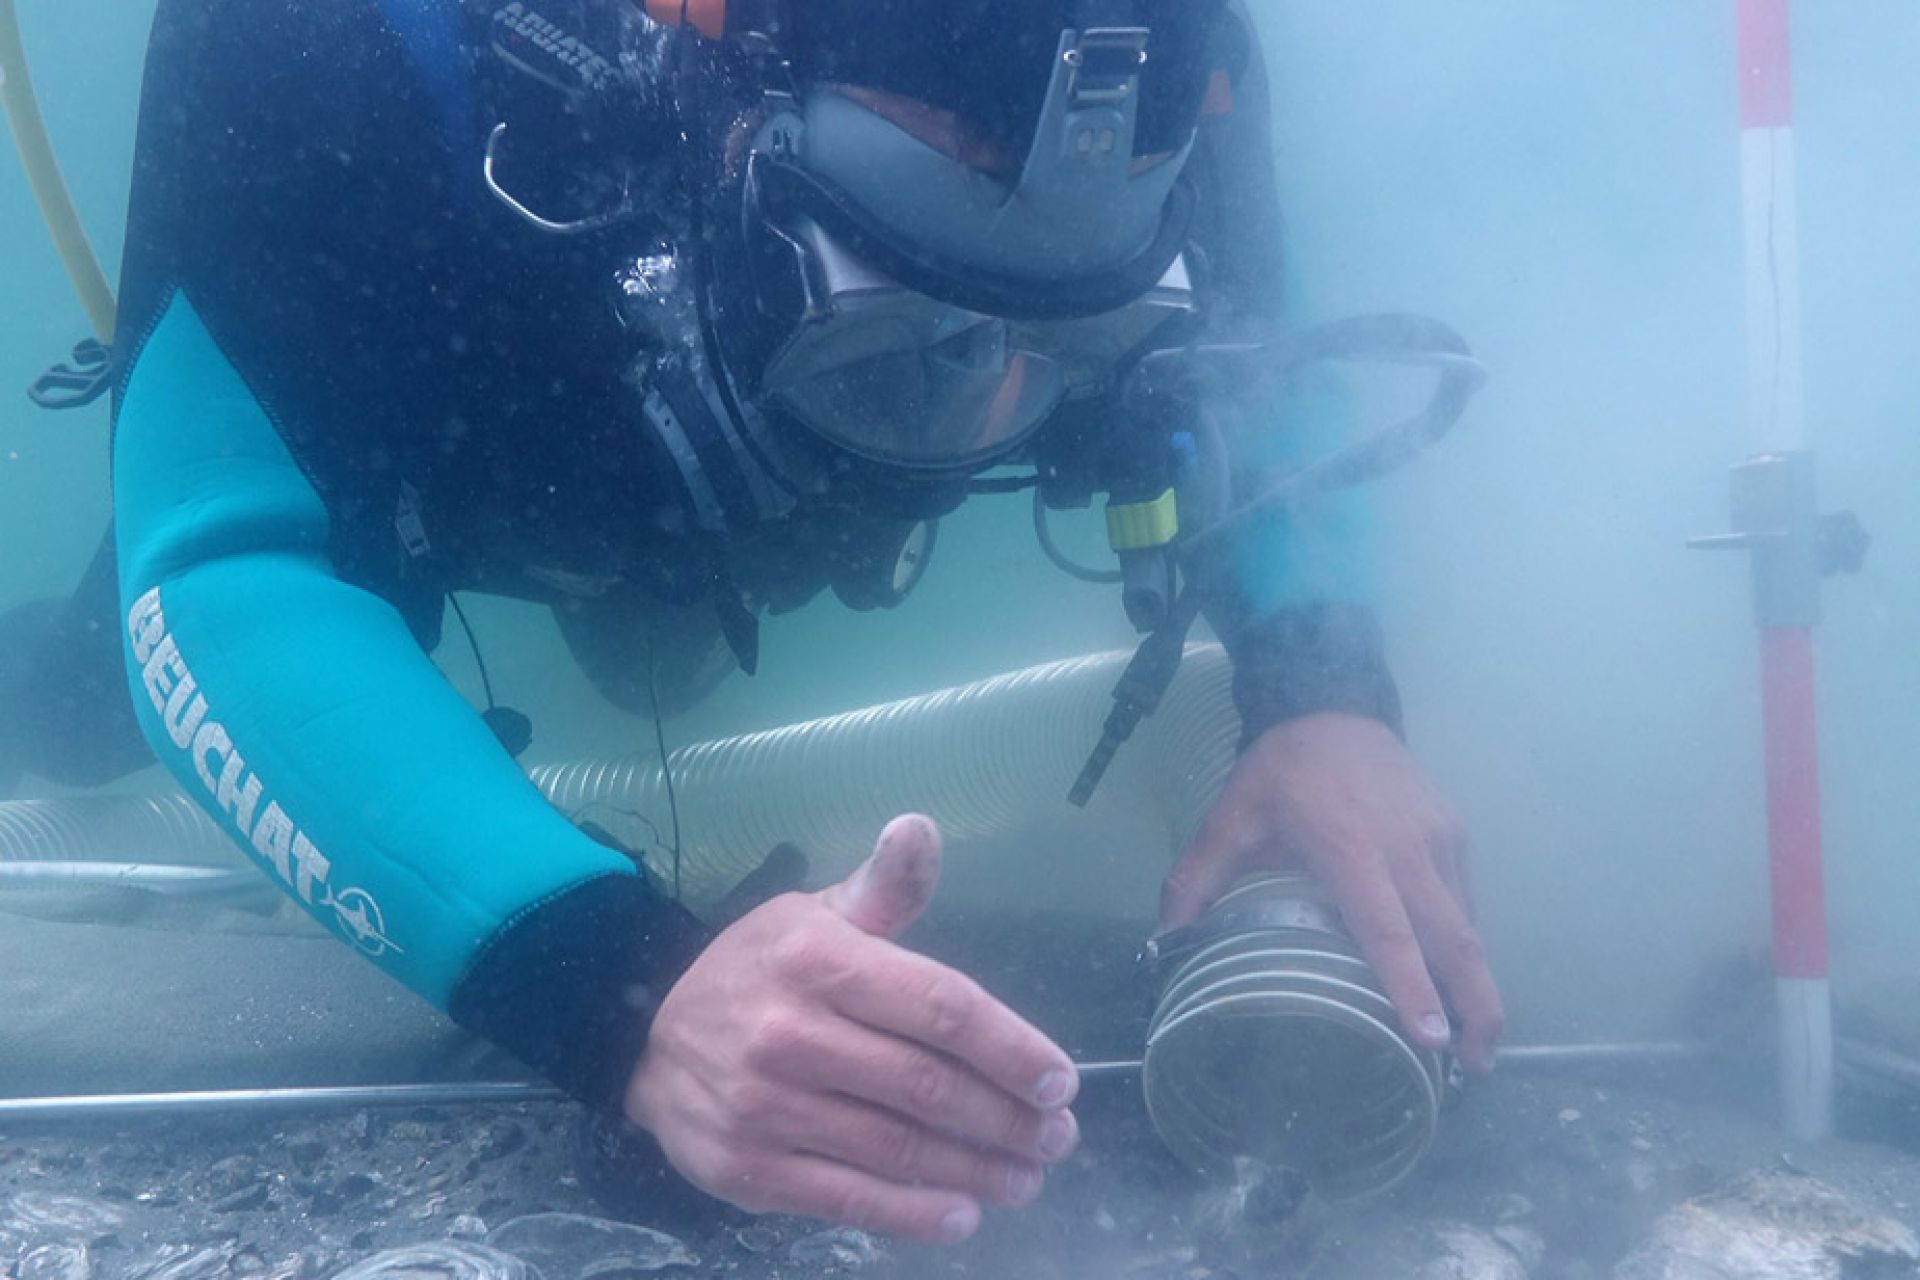 A diver collects samples